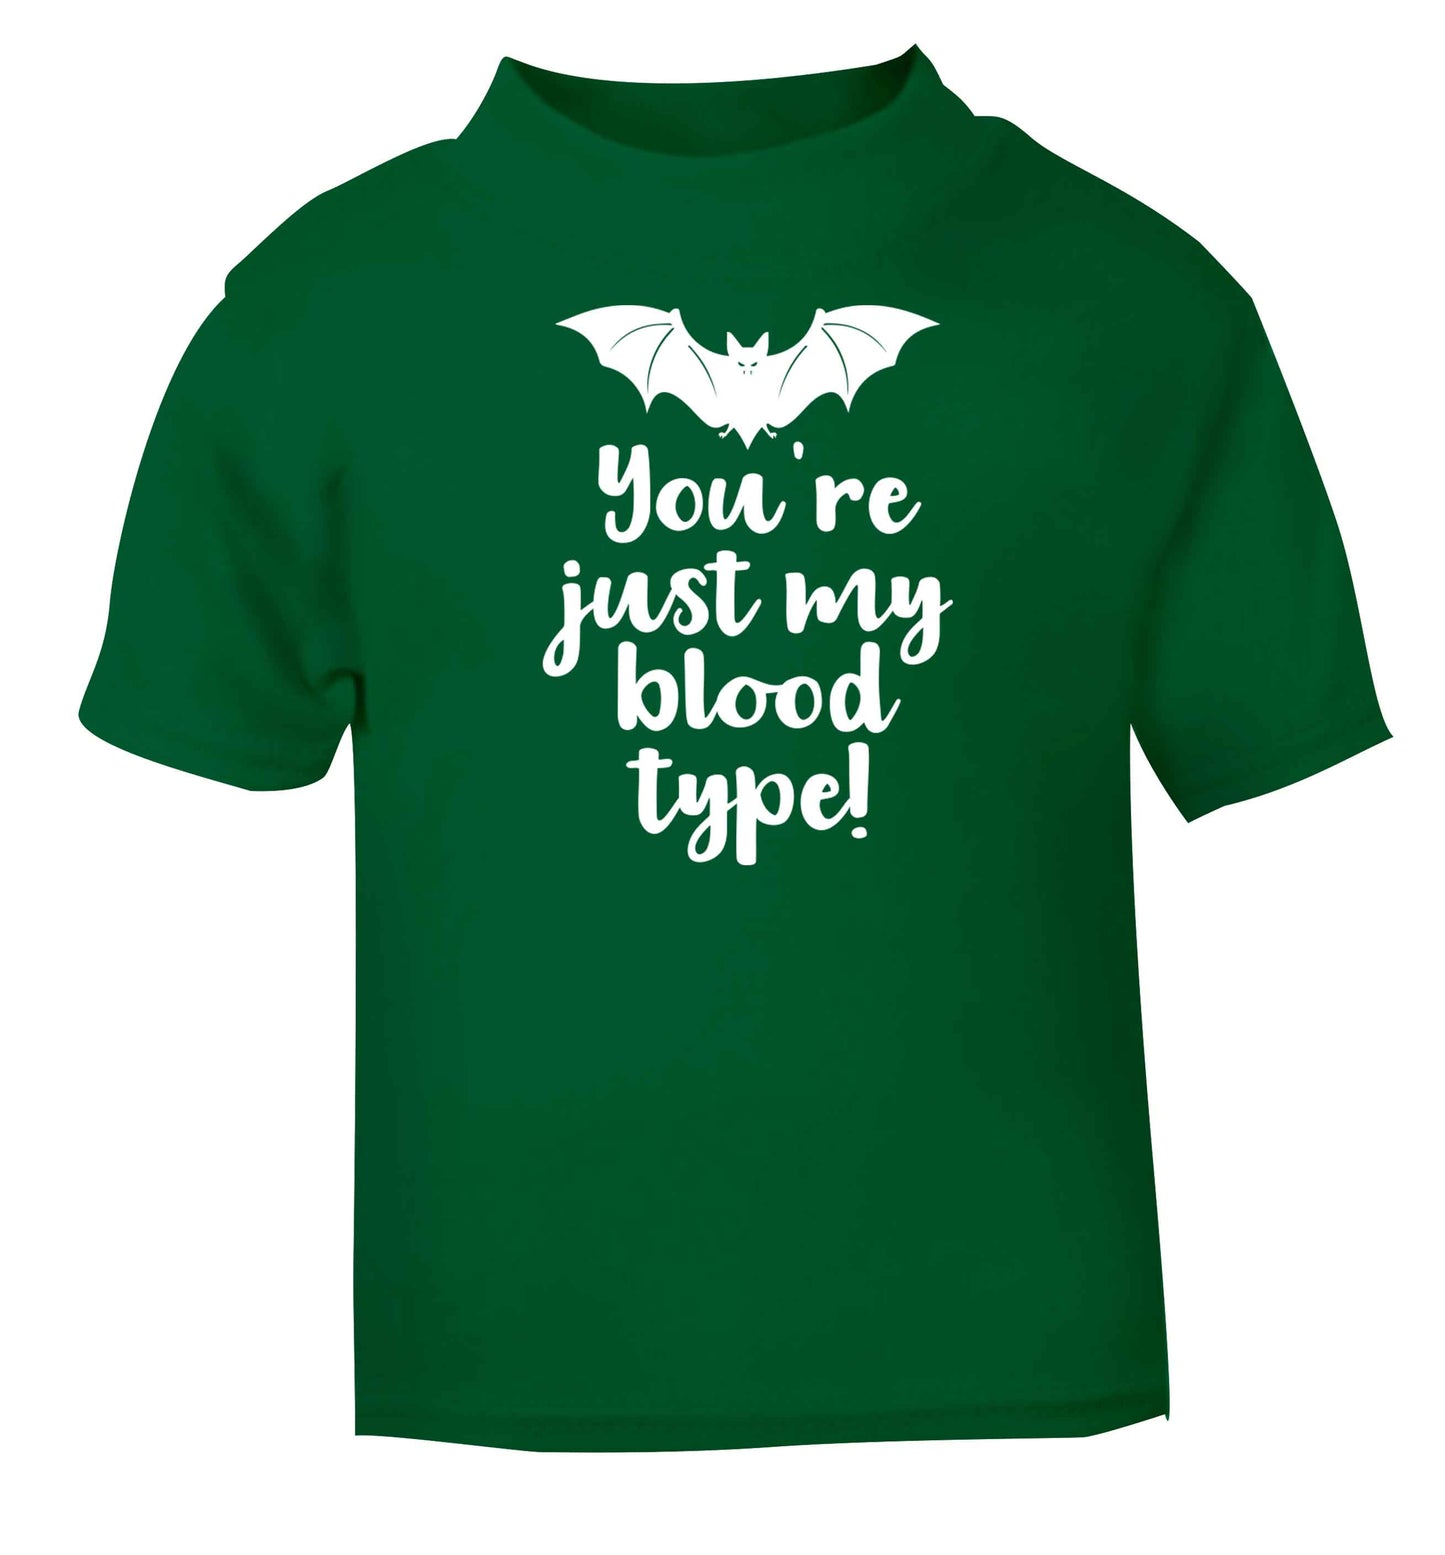 You're just my blood type green baby toddler Tshirt 2 Years